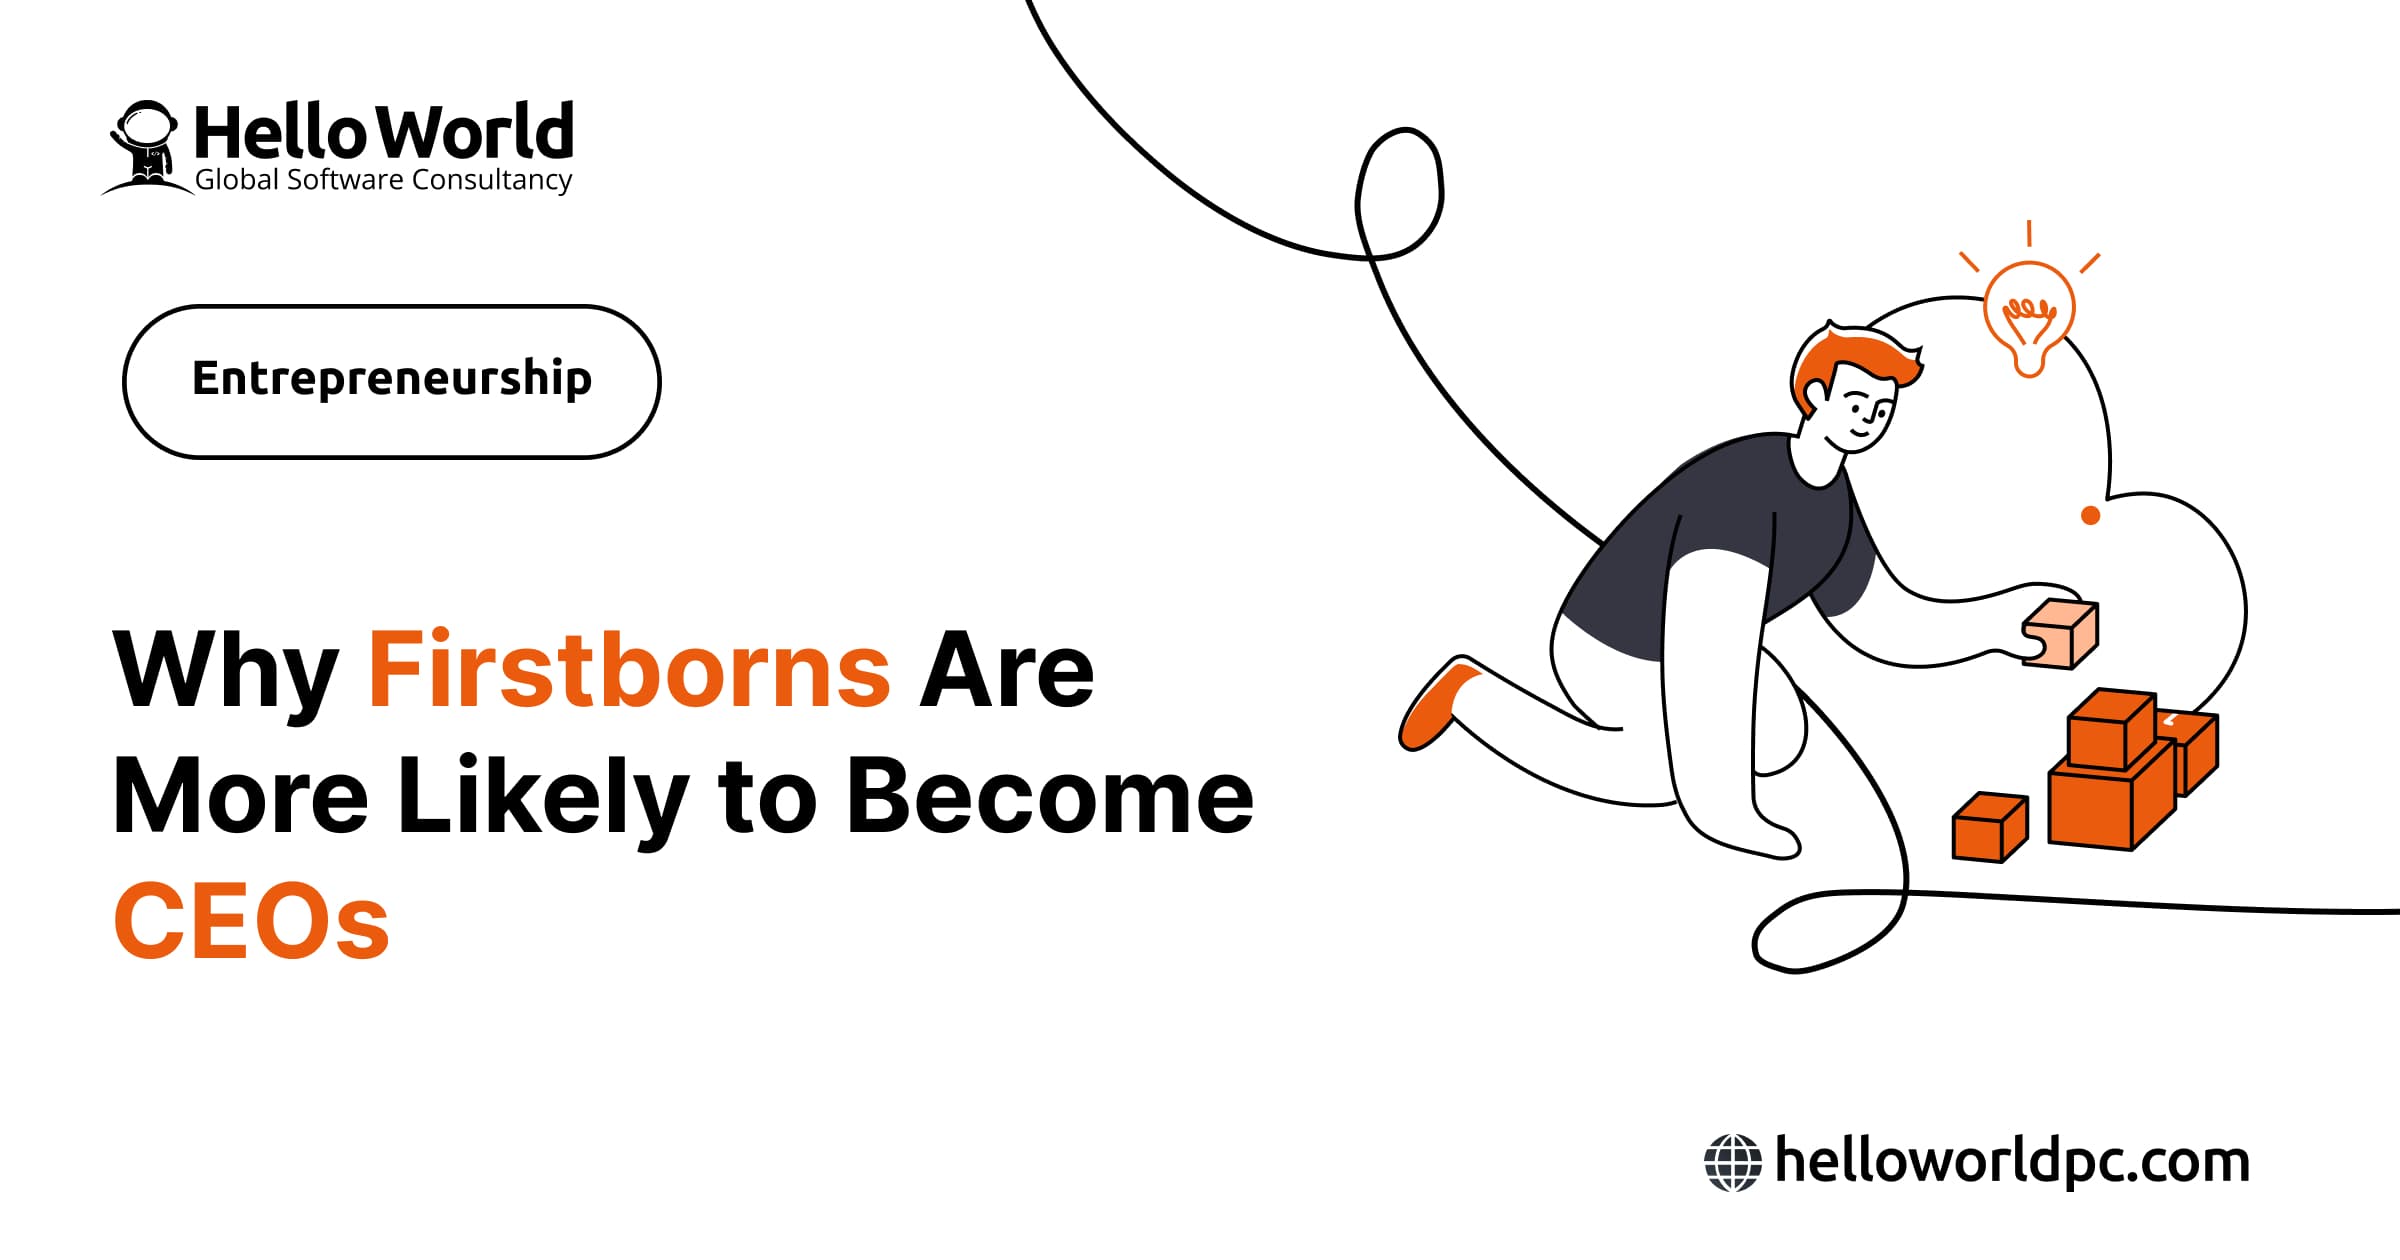 Why Firstborns Are More Likely to Become CEOs